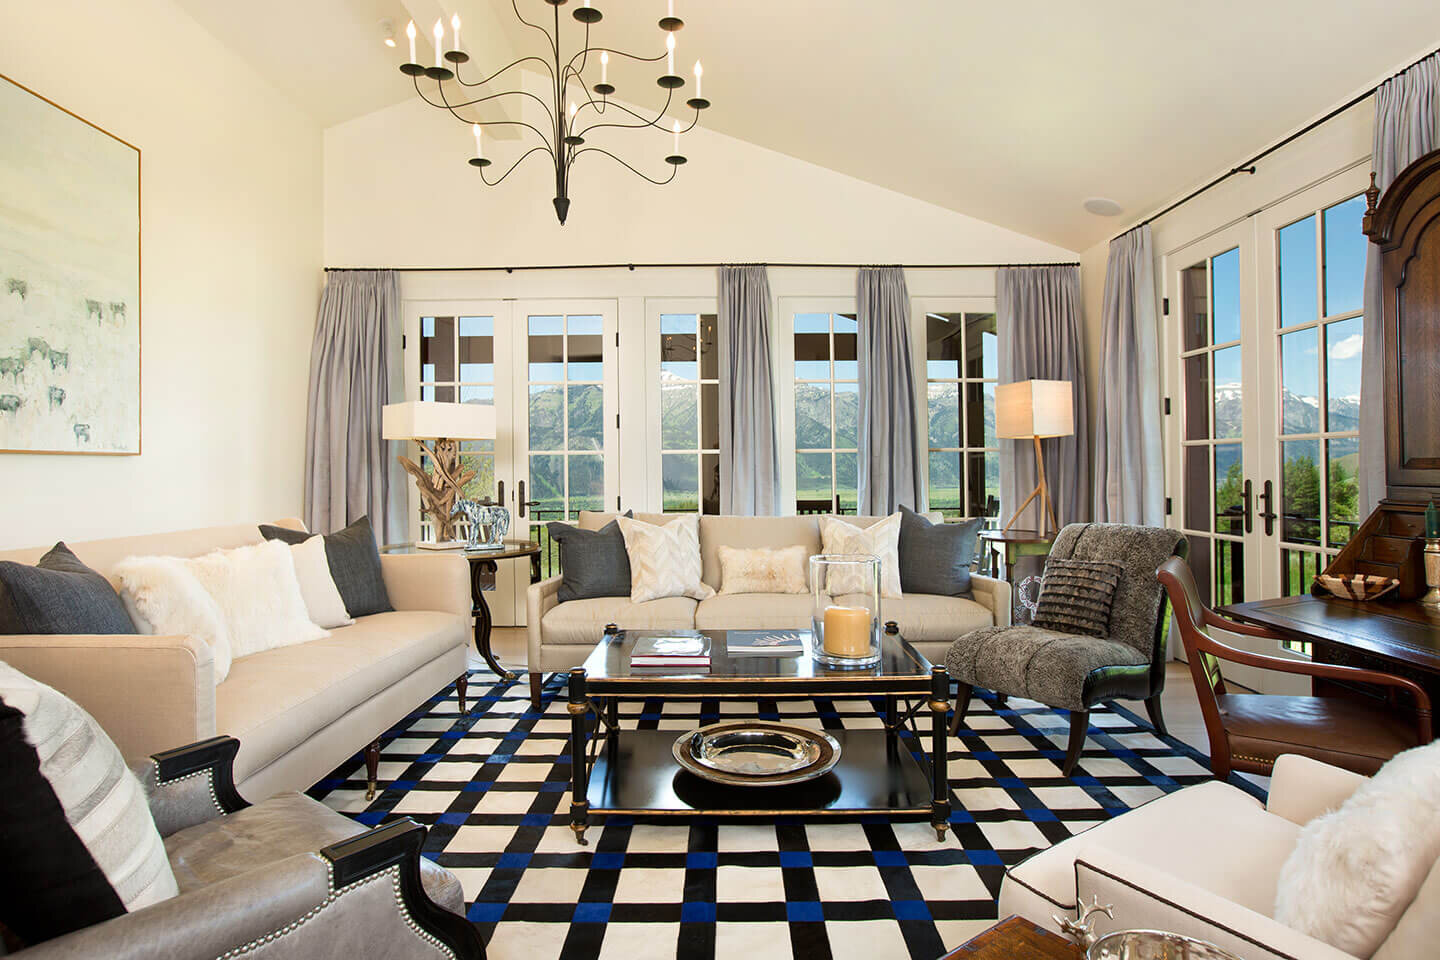 Living room with geometric pattern rug and chandelier